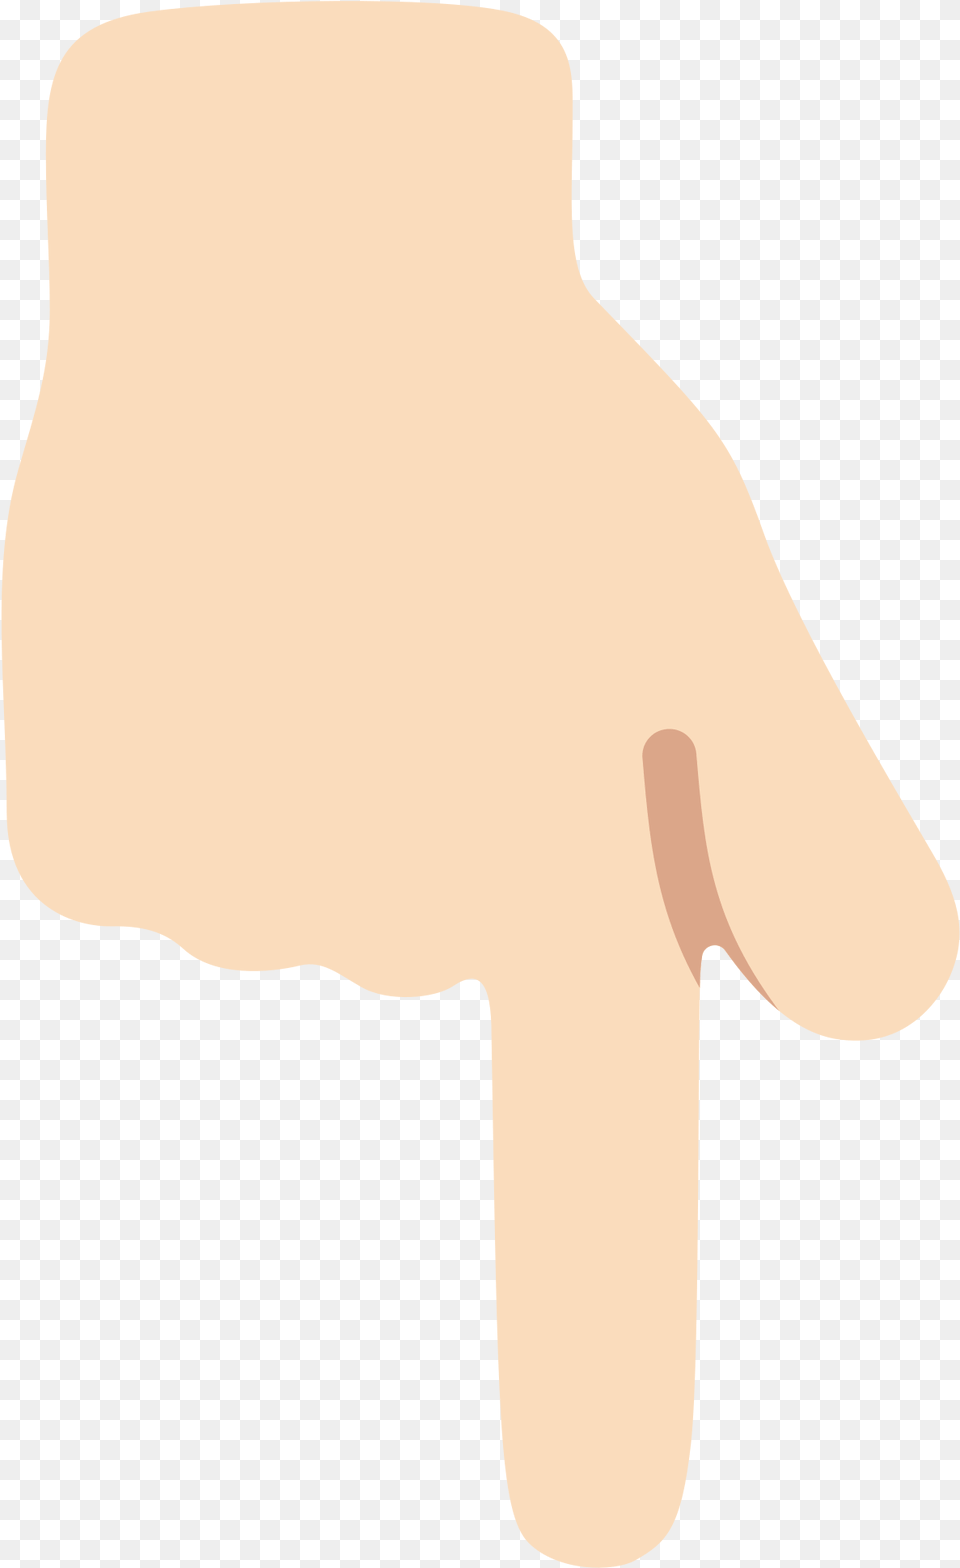 Finger Pointing Down Emoji Emoji Hand Down, Body Part, Clothing, Glove, Person Png